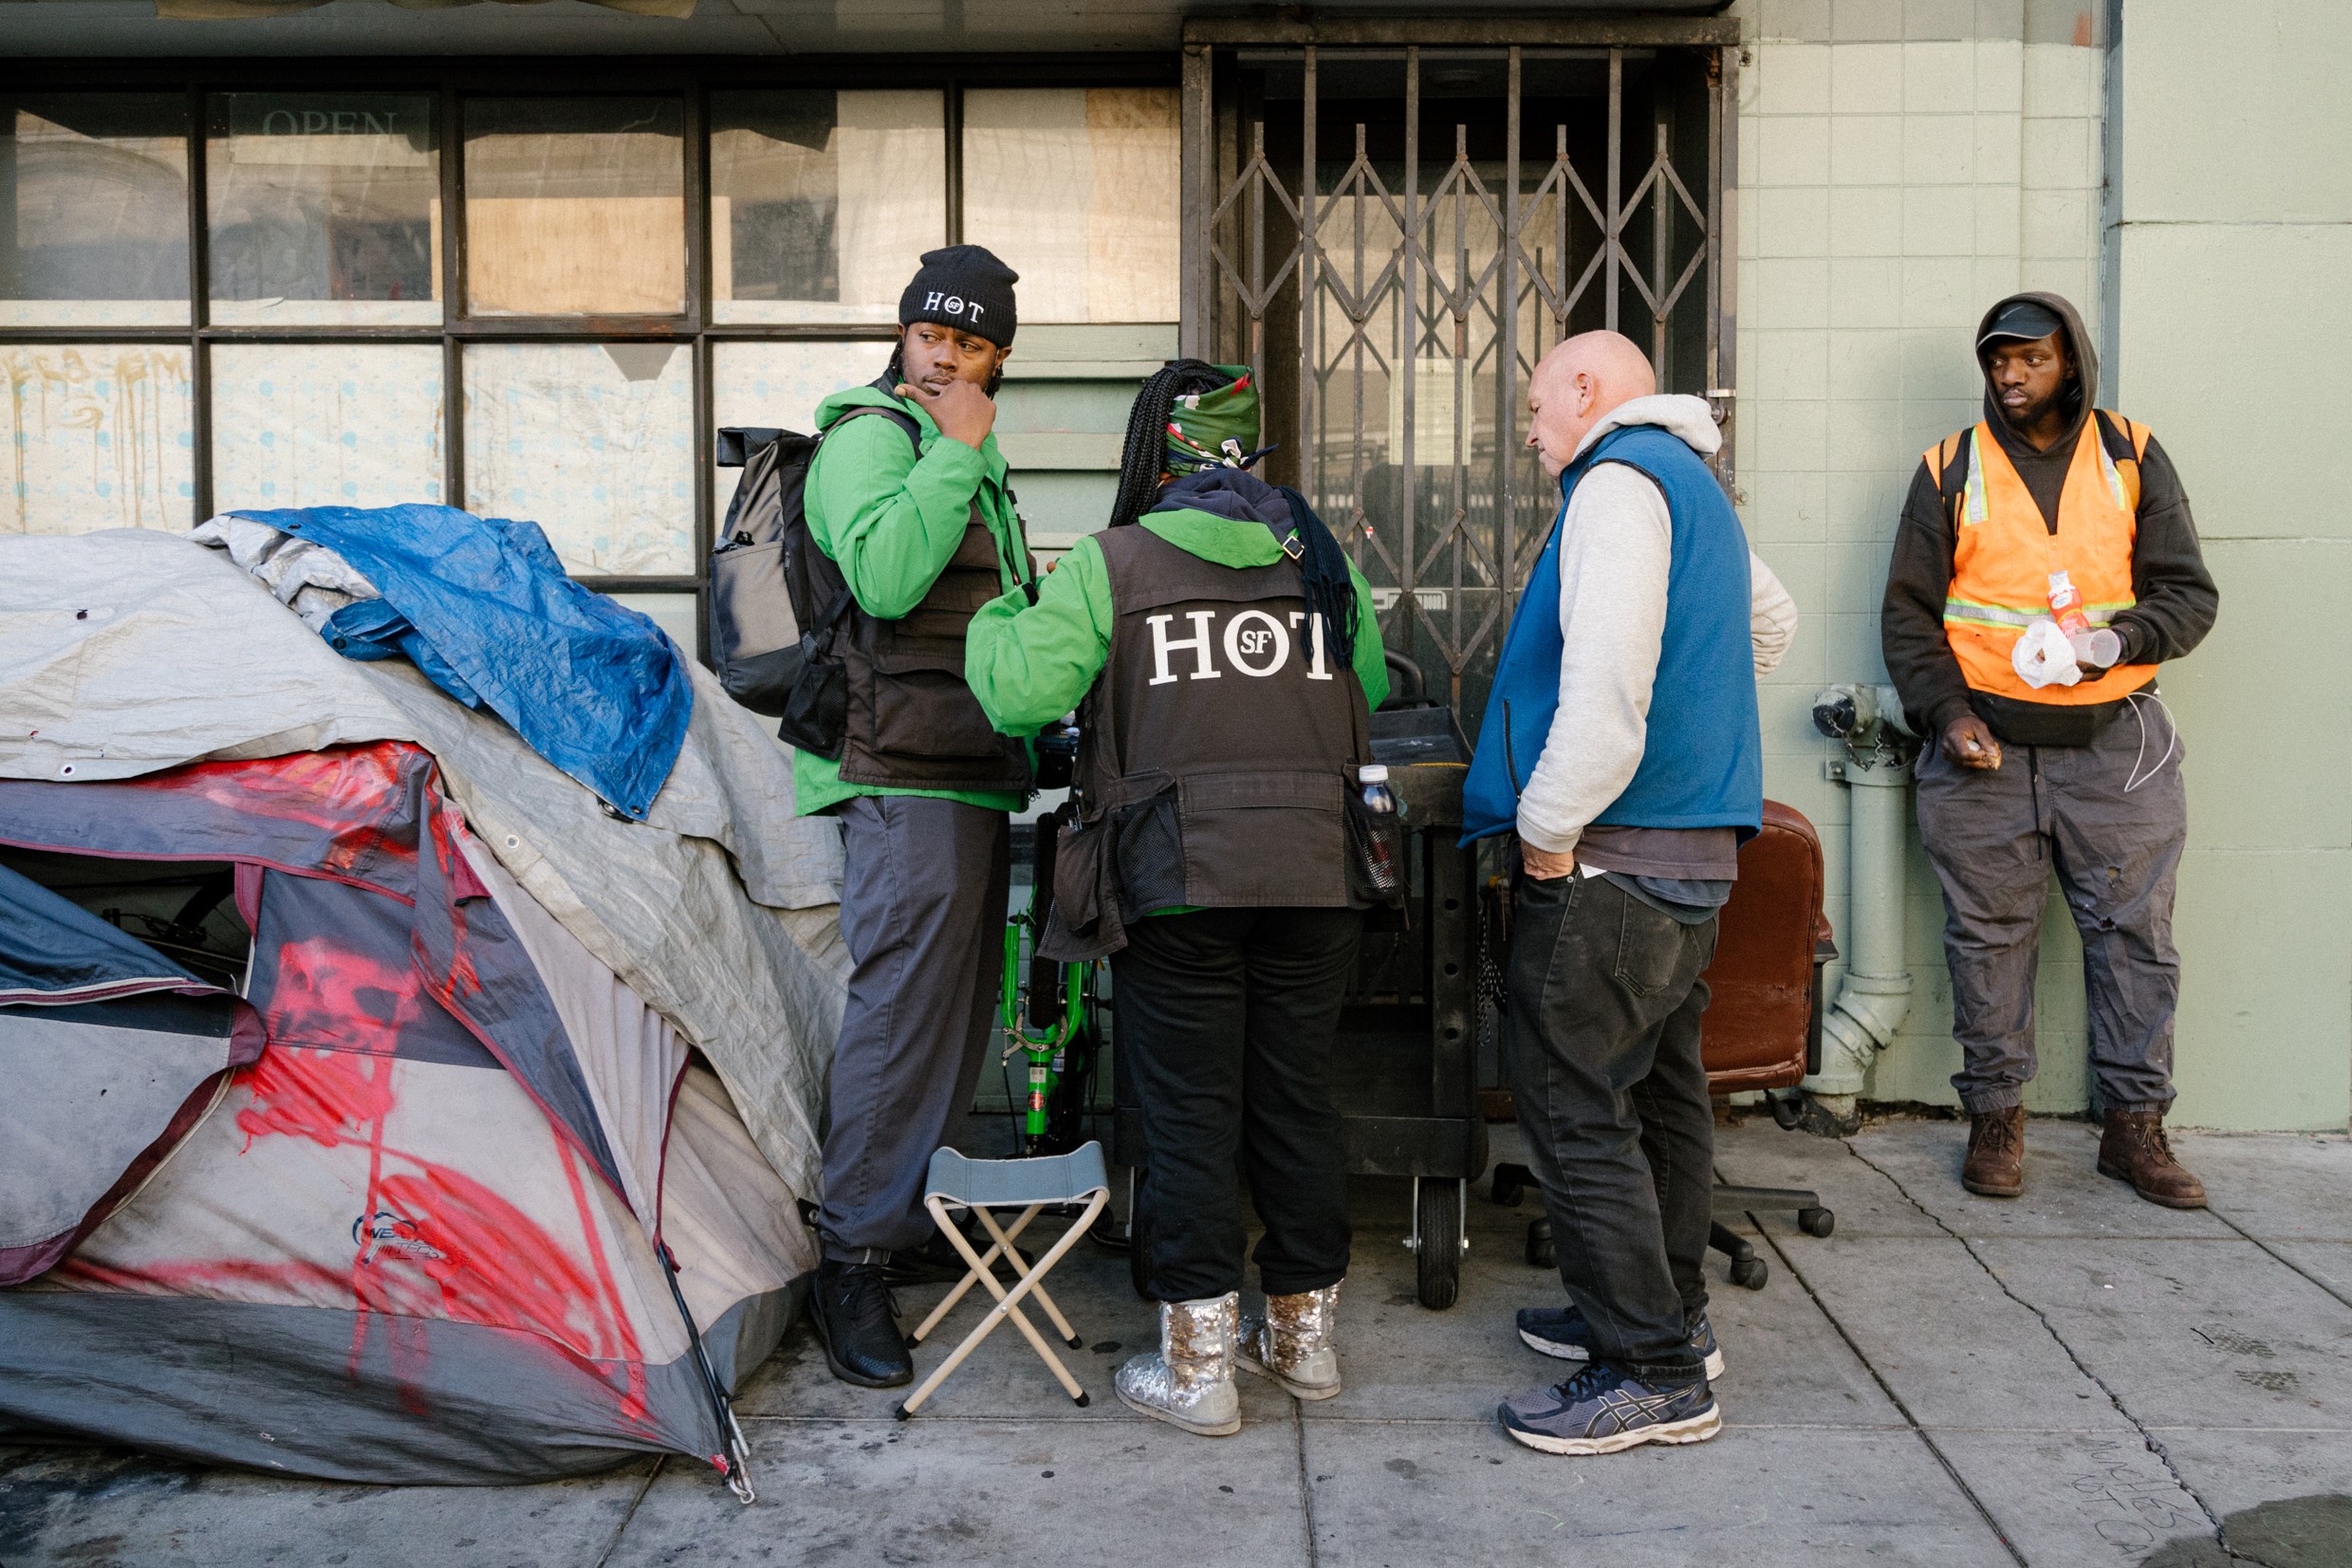 Four people are gathered on a sidewalk near a makeshift shelter. Two wear green and black "HOT" jackets, one wears an orange vest, and another wears a blue vest.